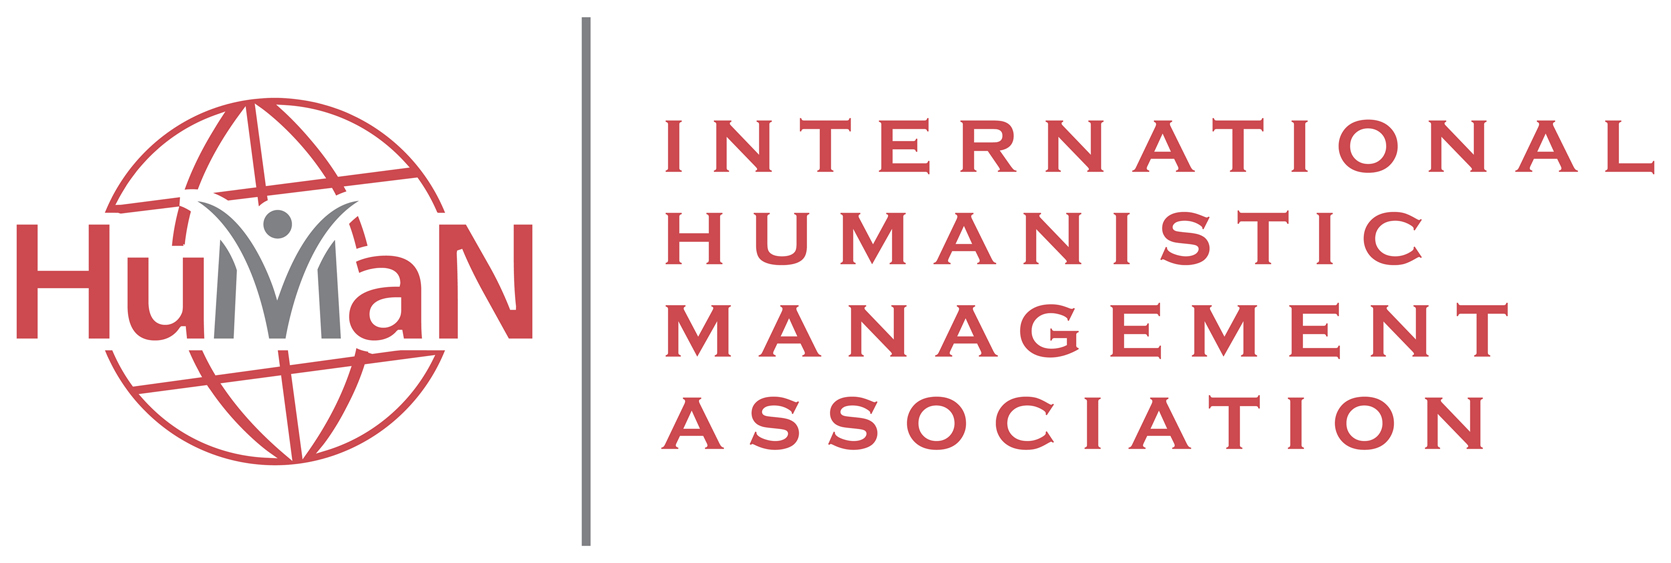 What is Humanistic Management